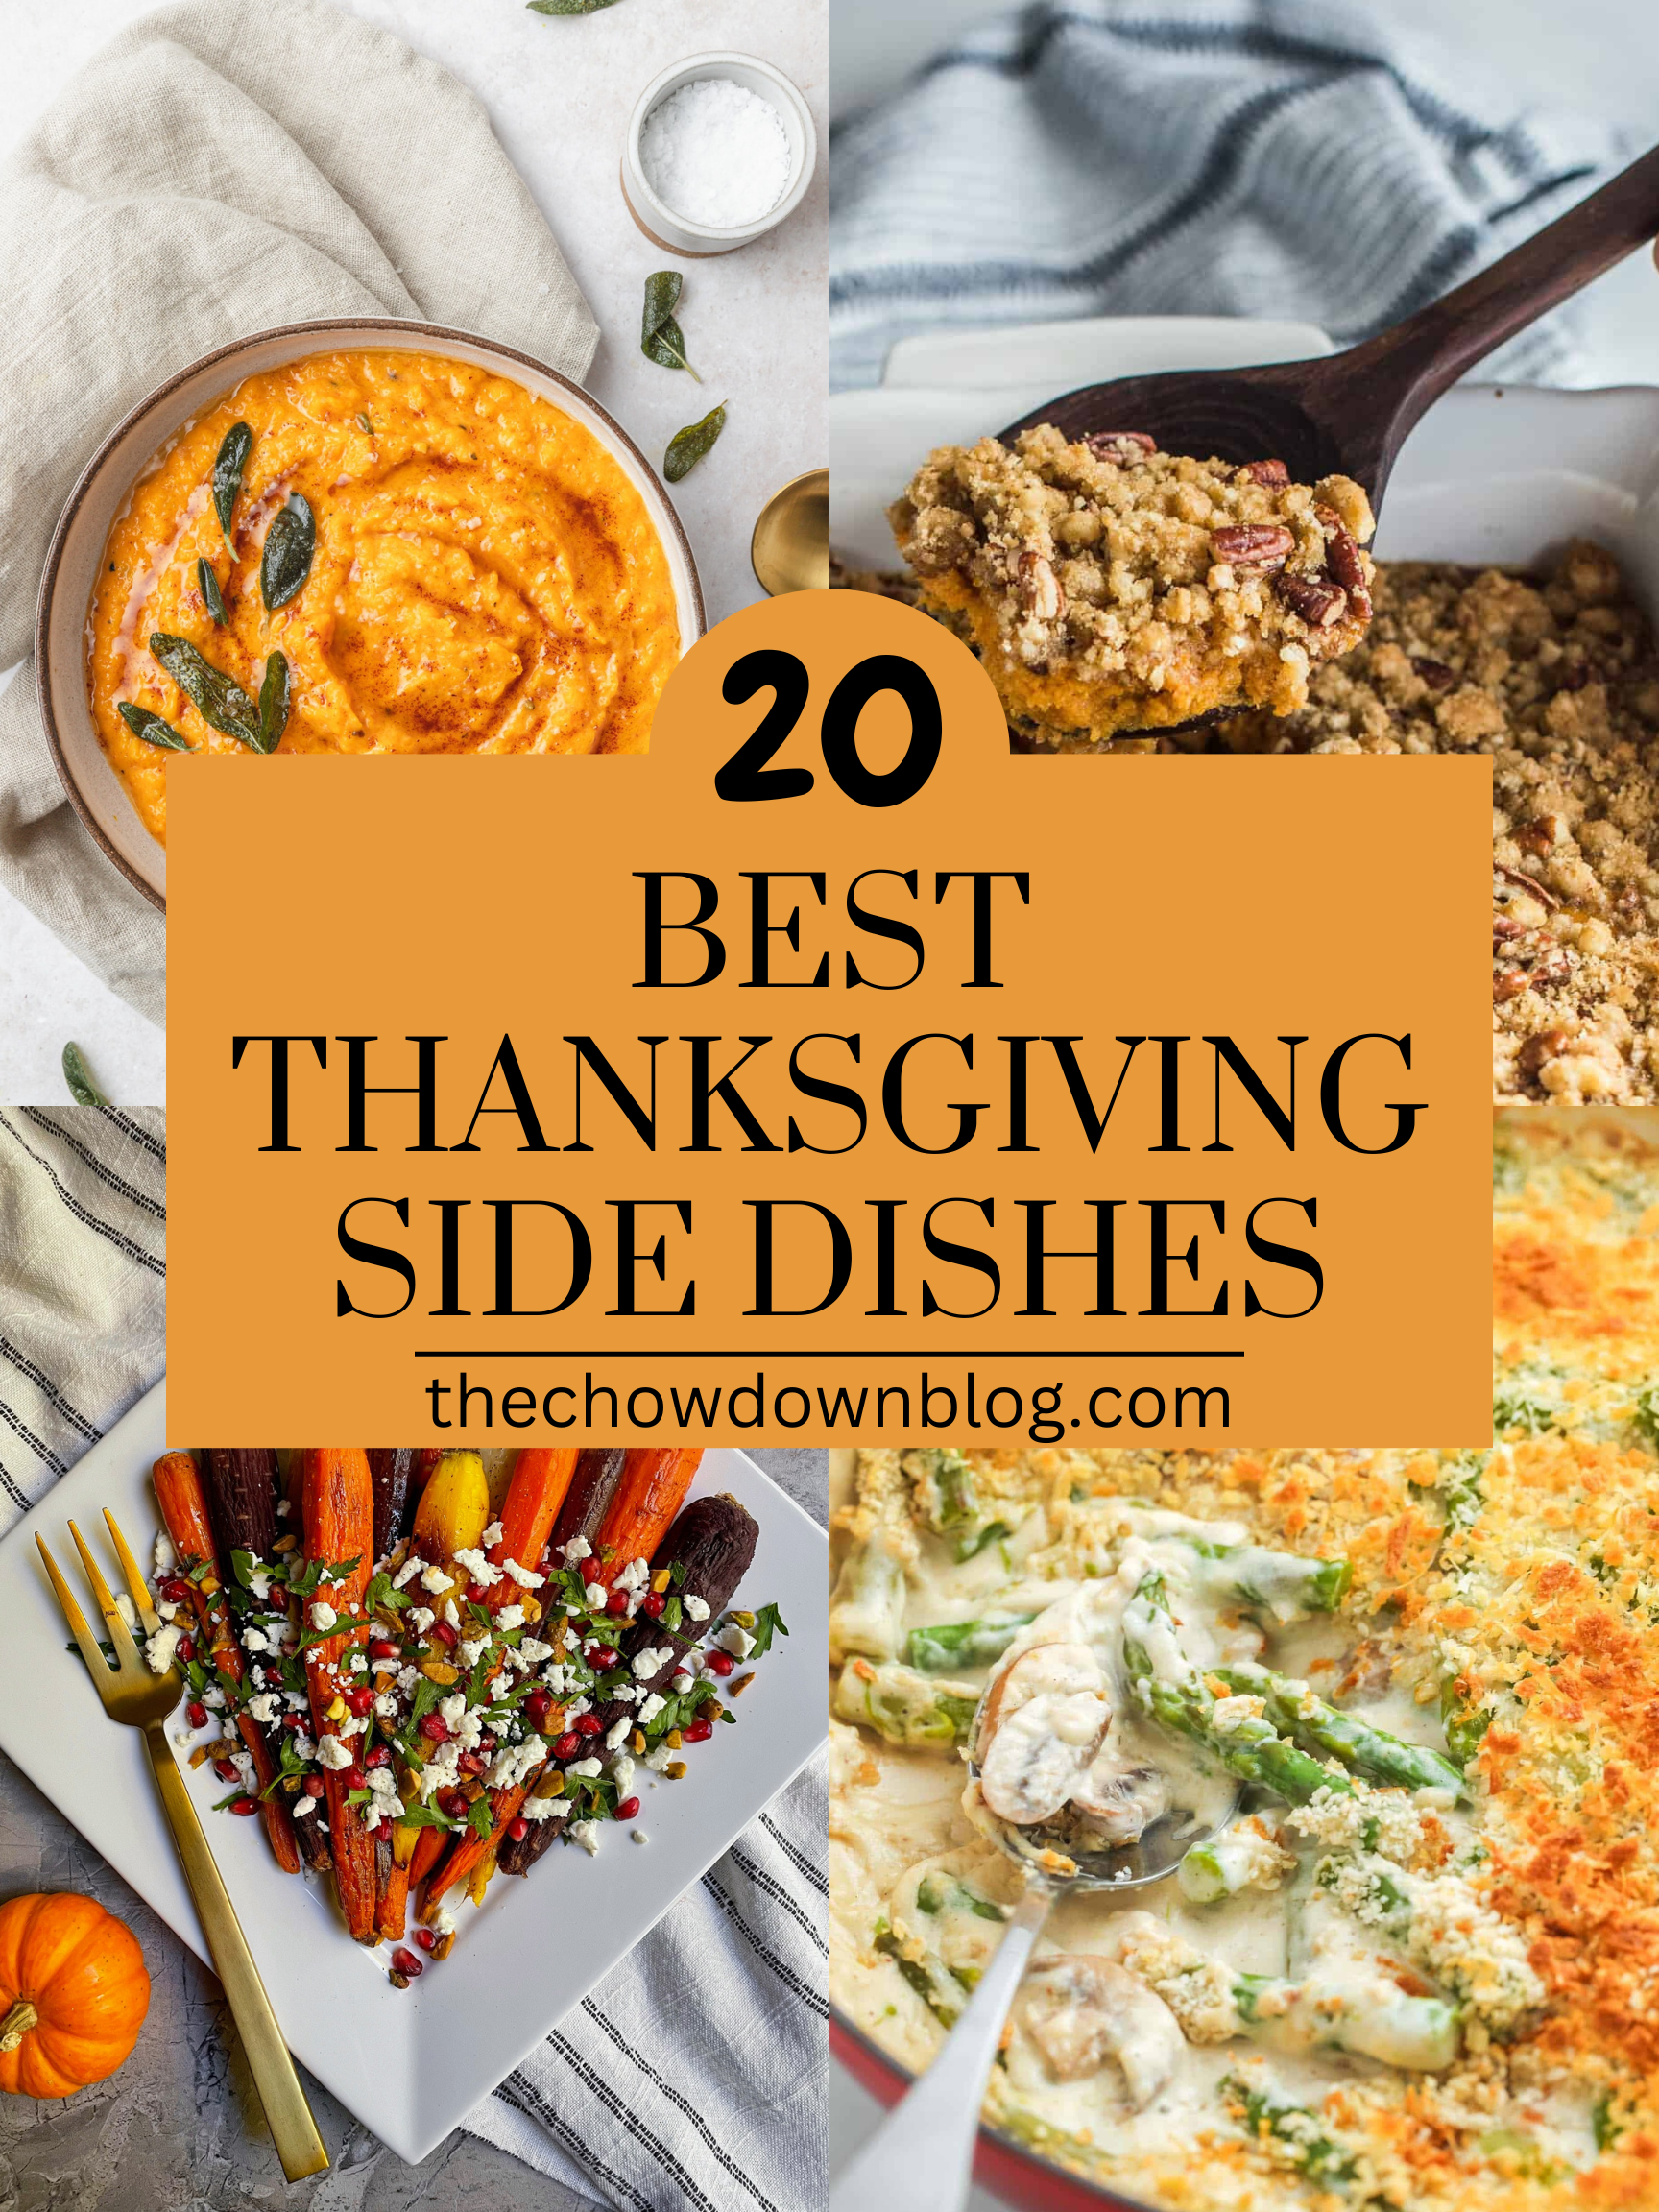 20 Best Thanksgiving Side Dishes